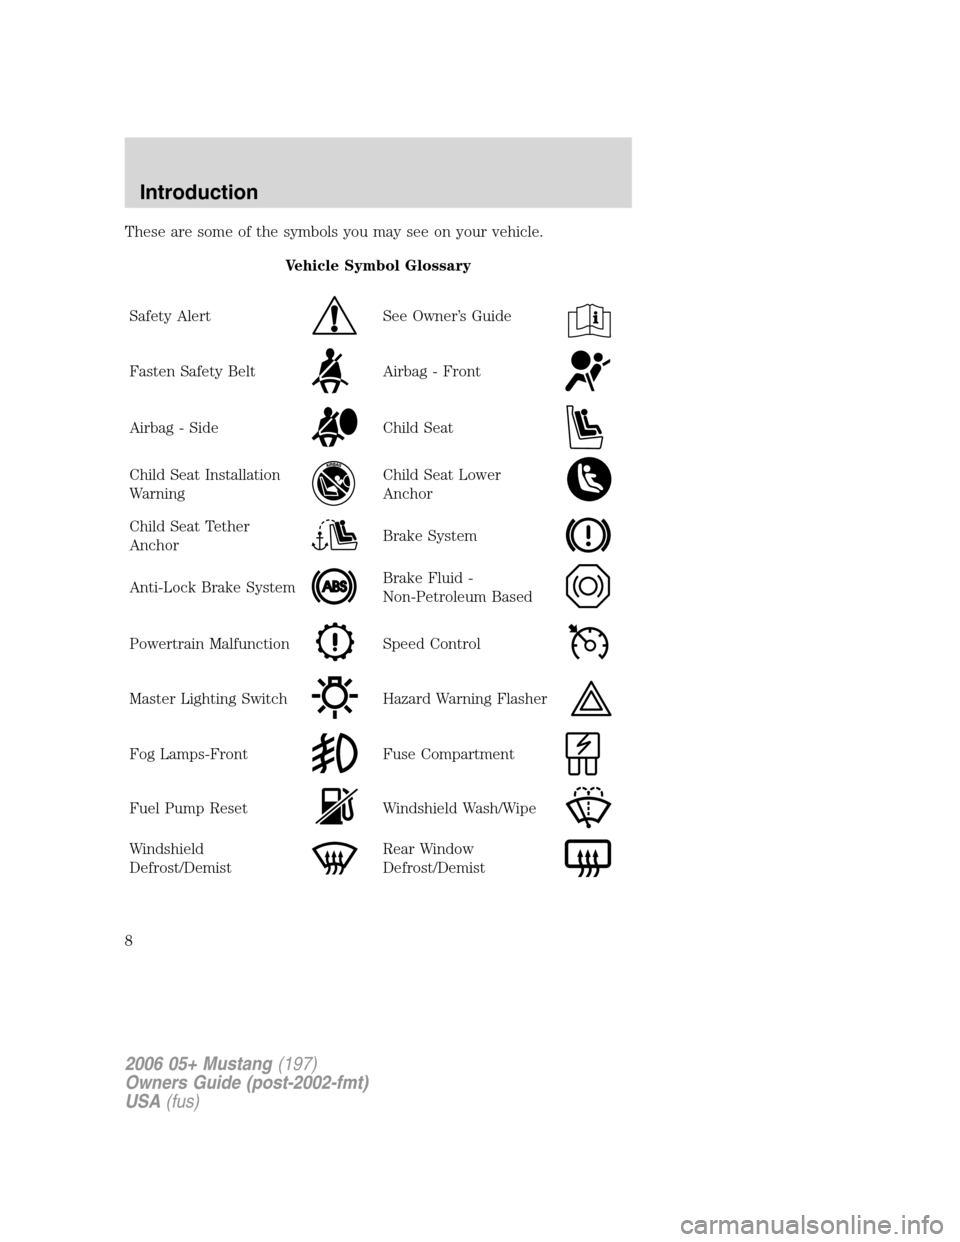 FORD MUSTANG 2006 5.G Owners Manual These are some of the symbols you may see on your vehicle.
Vehicle Symbol Glossary
Safety Alert
See Owner’s Guide
Fasten Safety BeltAirbag - Front
Airbag - SideChild Seat
Child Seat Installation
War